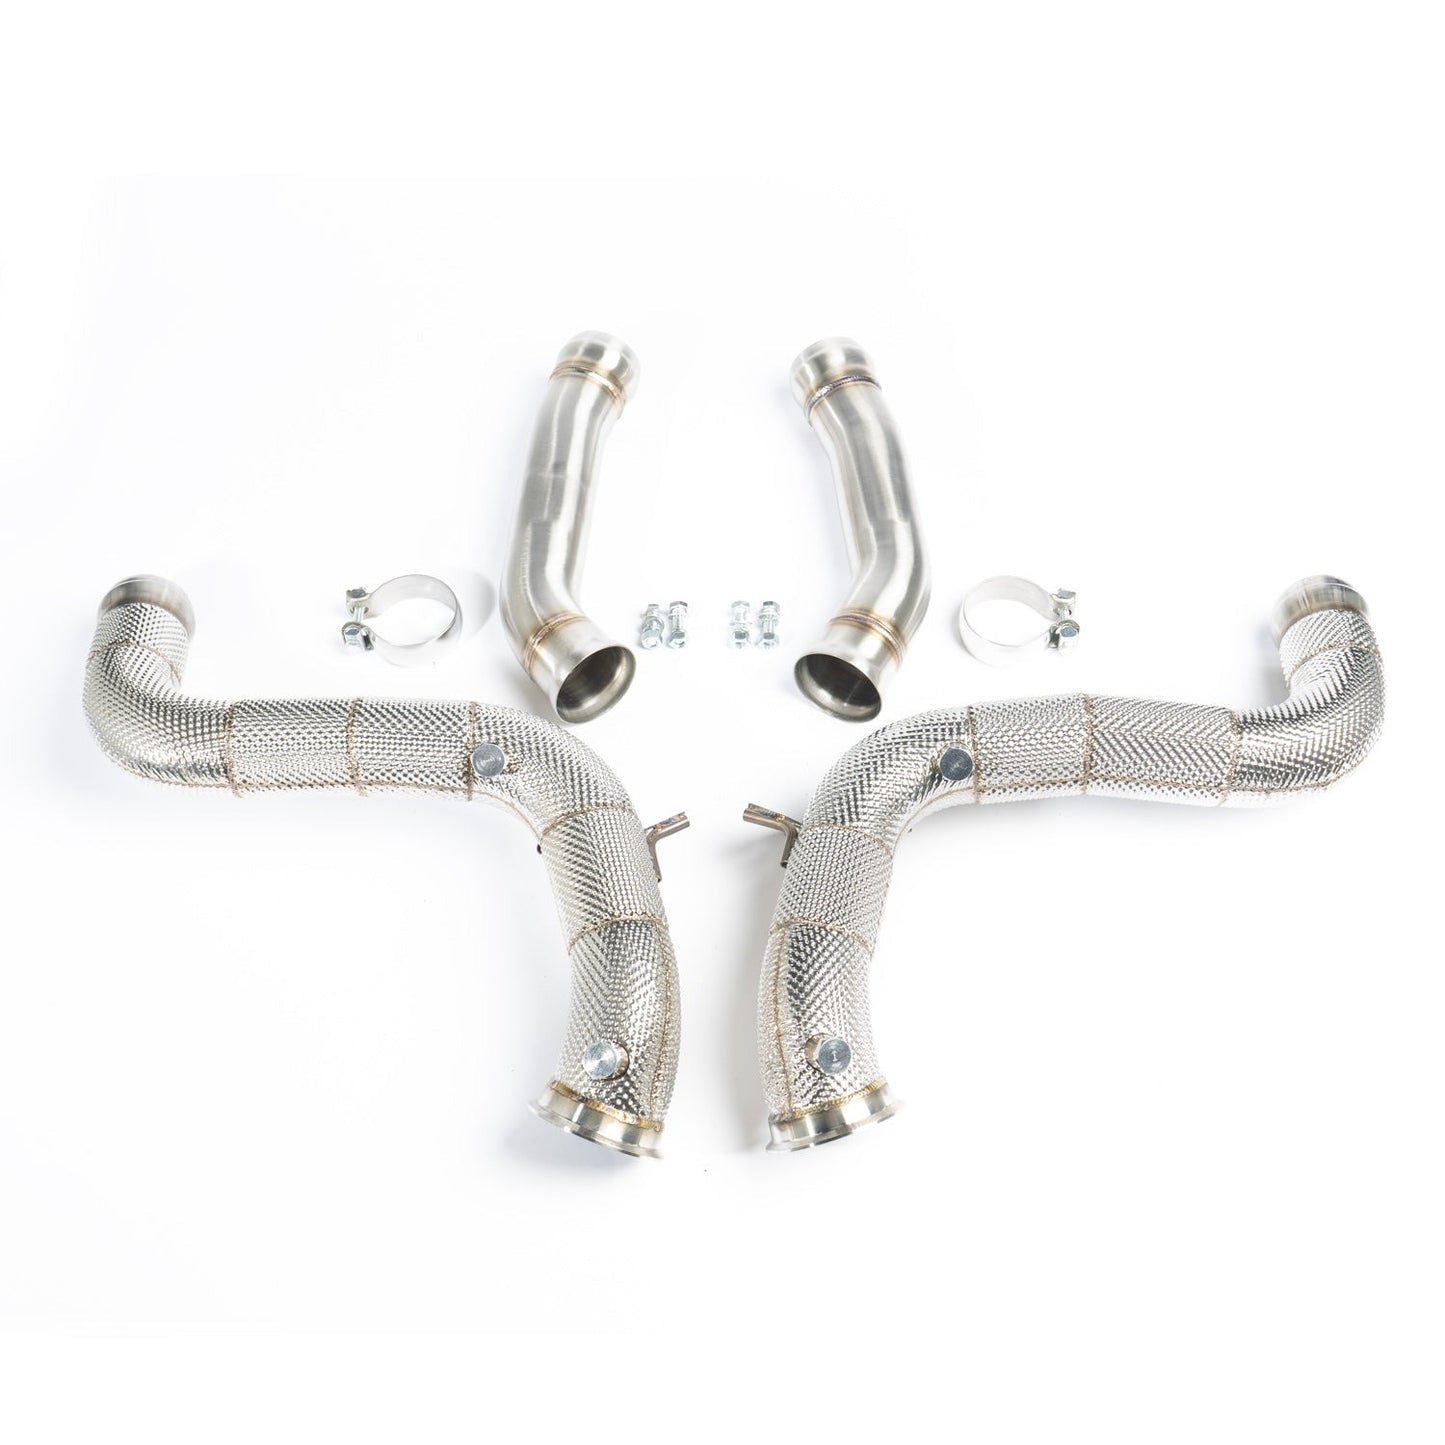 CTS Turbo Race Downpipes W205/M177 (C63/63S AMG)